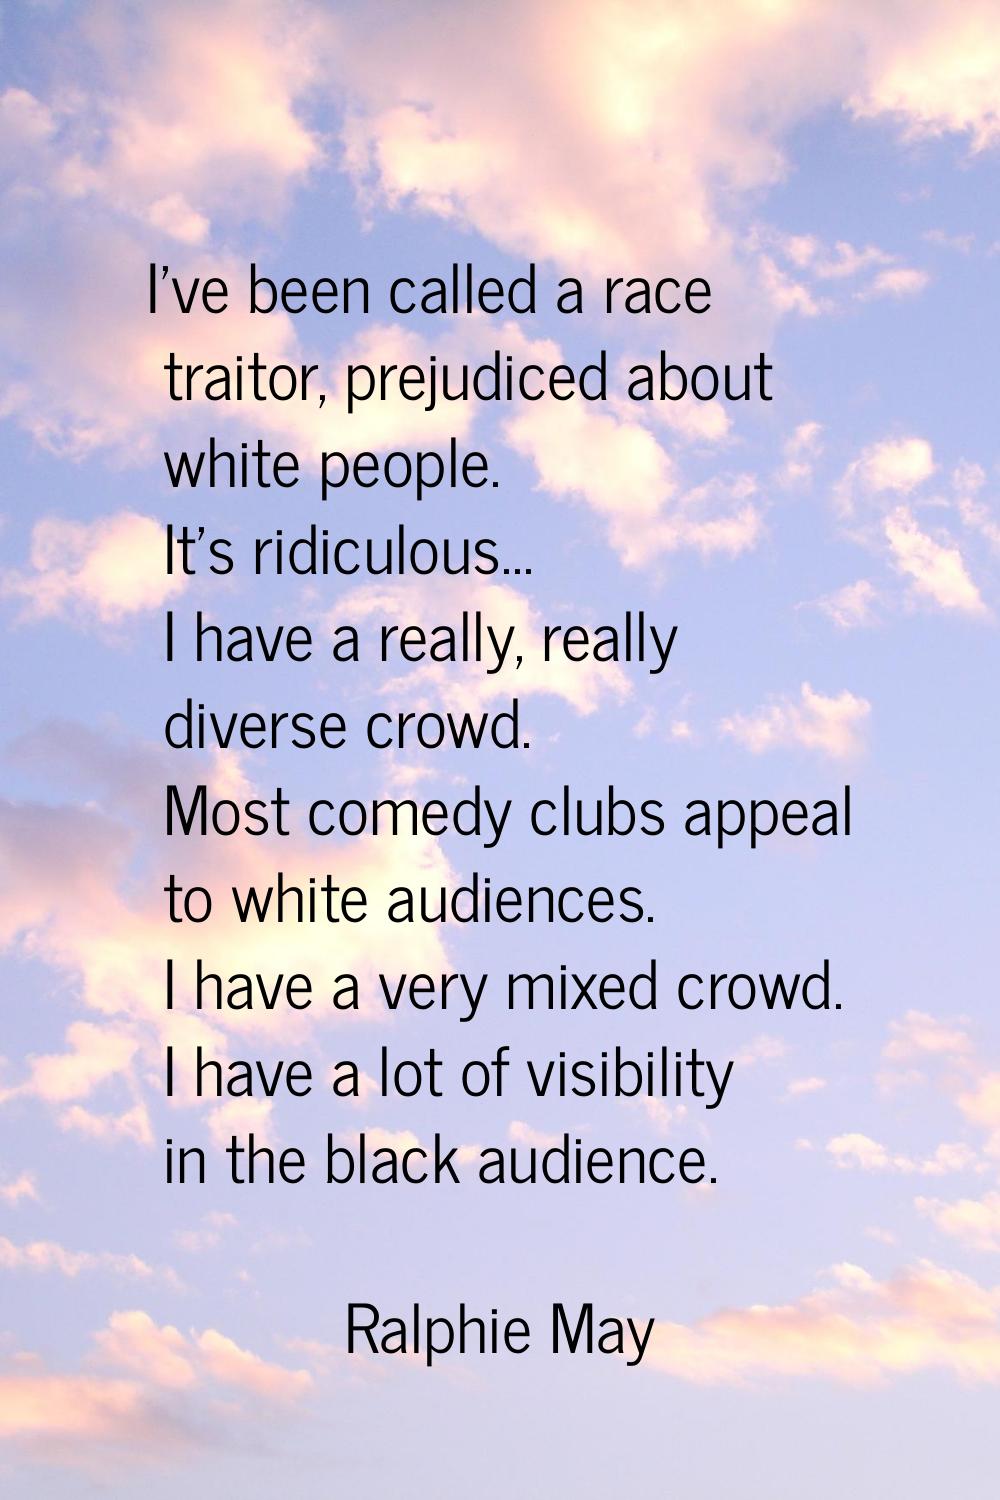 I've been called a race traitor, prejudiced about white people. It's ridiculous... I have a really,